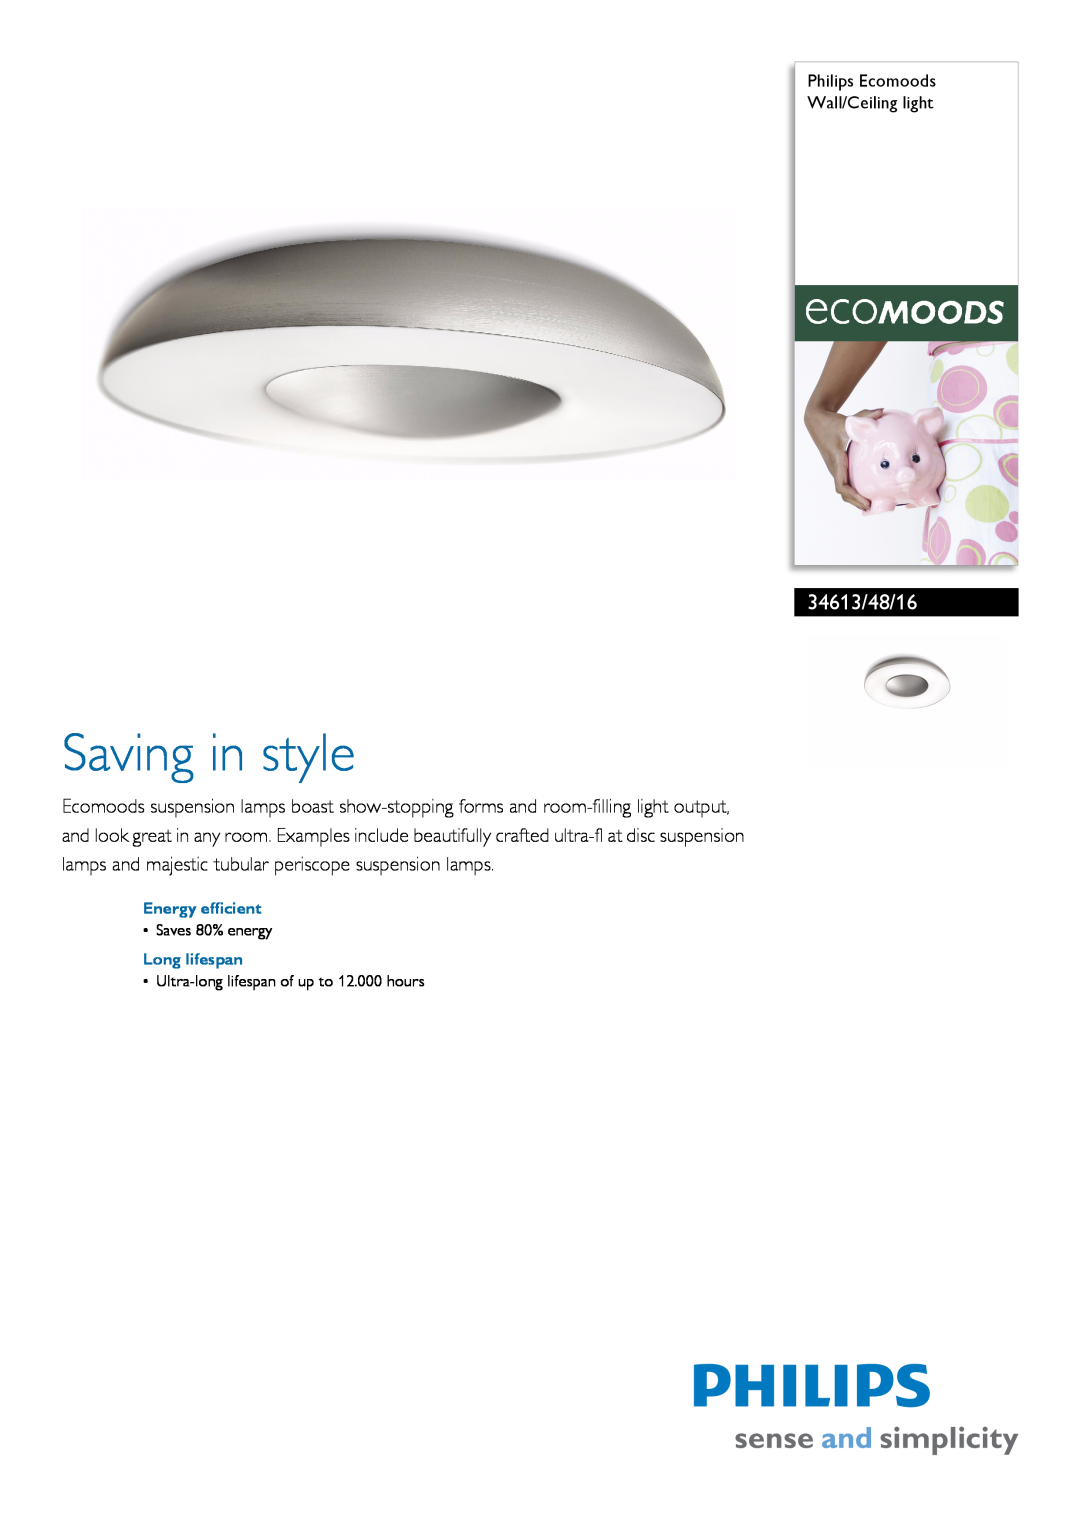 Philips 34613/48/16 manual Philips Ecomoods Wall/Ceiling light, Energy efficient, Long lifespan, Saving in style 